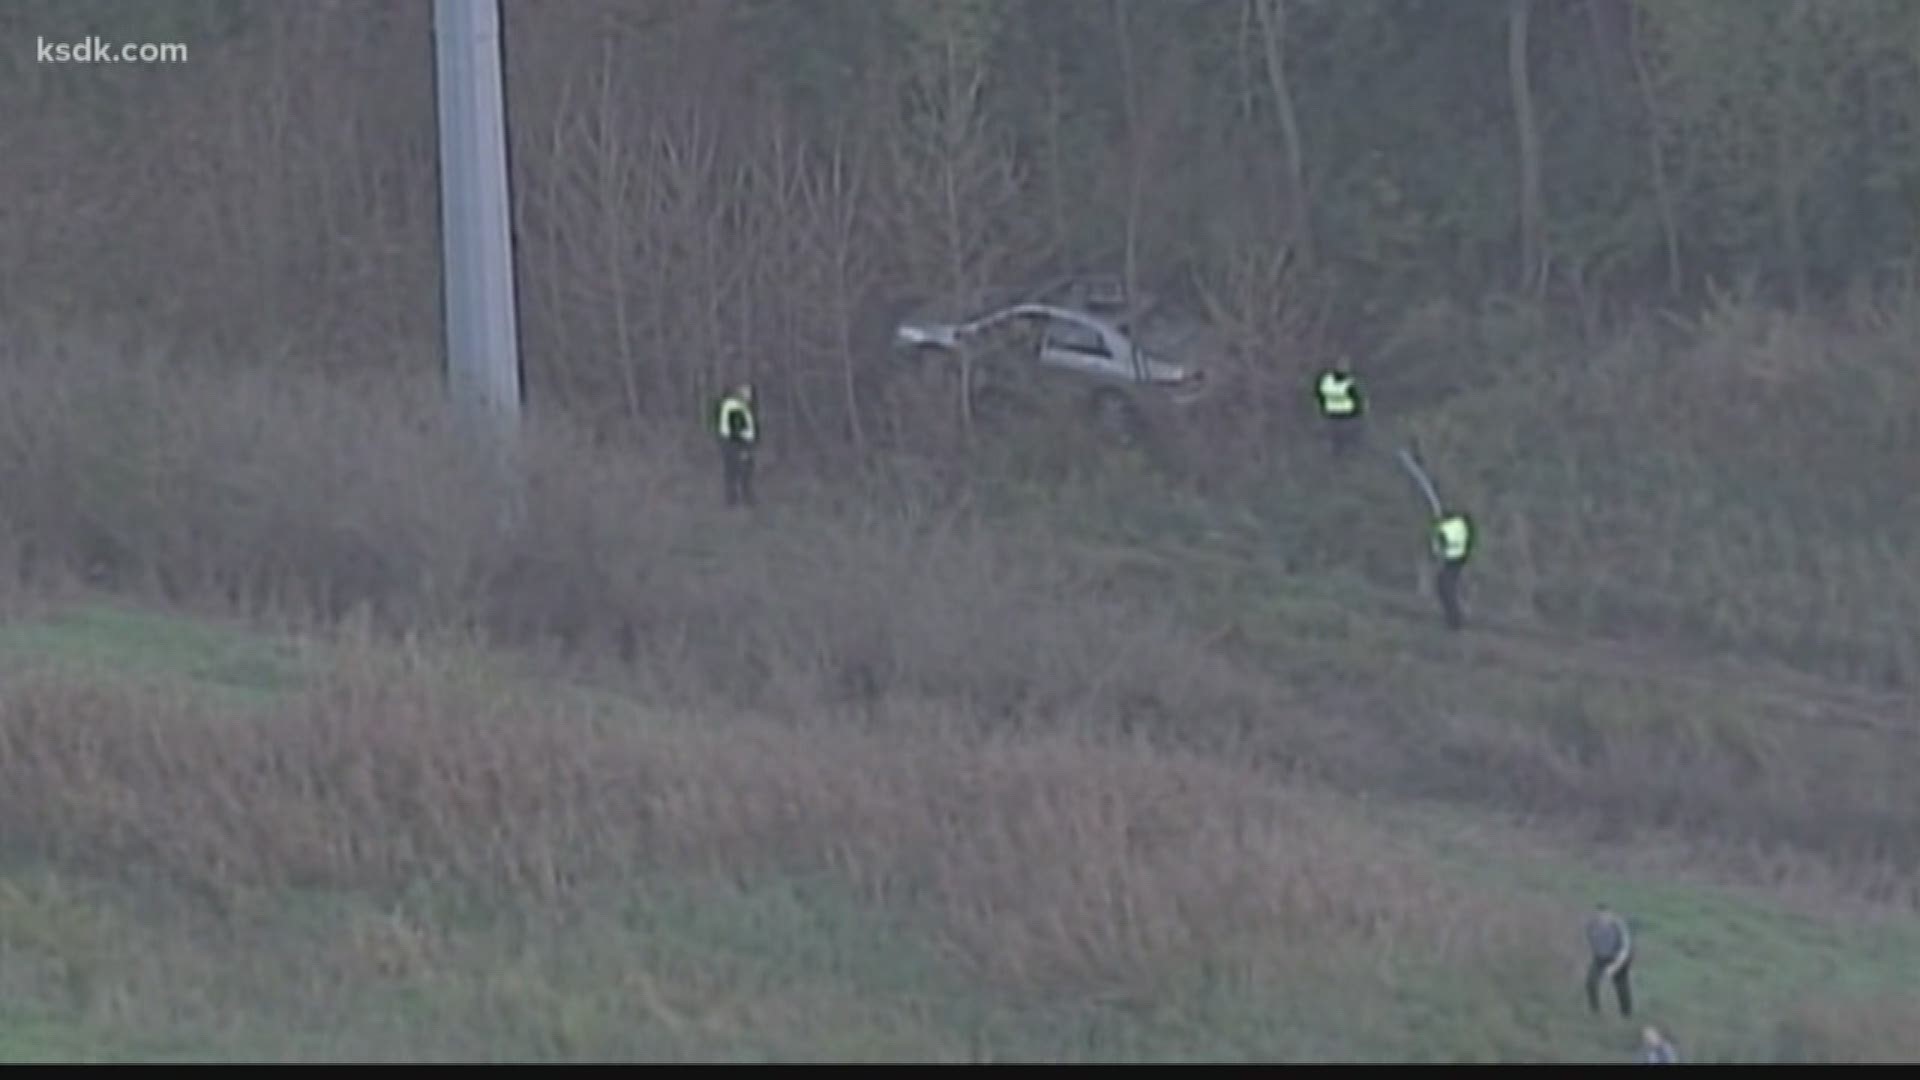 Crash investigators determined Linneman's car ran off of Interstate 470 and went down a 50-foot incline.